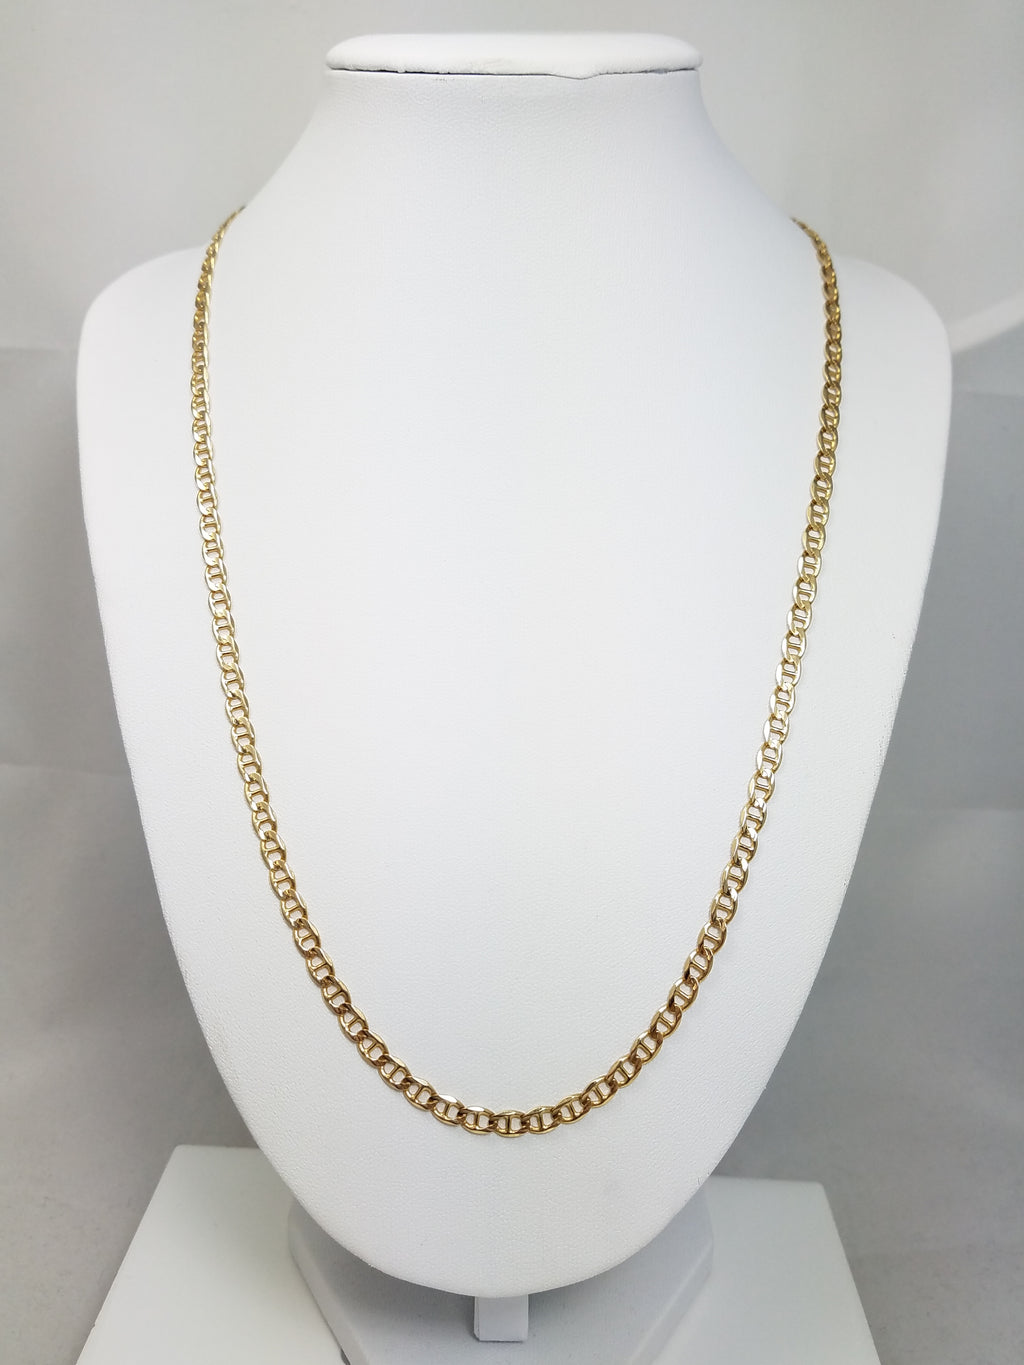 21" 14k Solid Yellow Gold Anchor Link Chain Necklace Italy